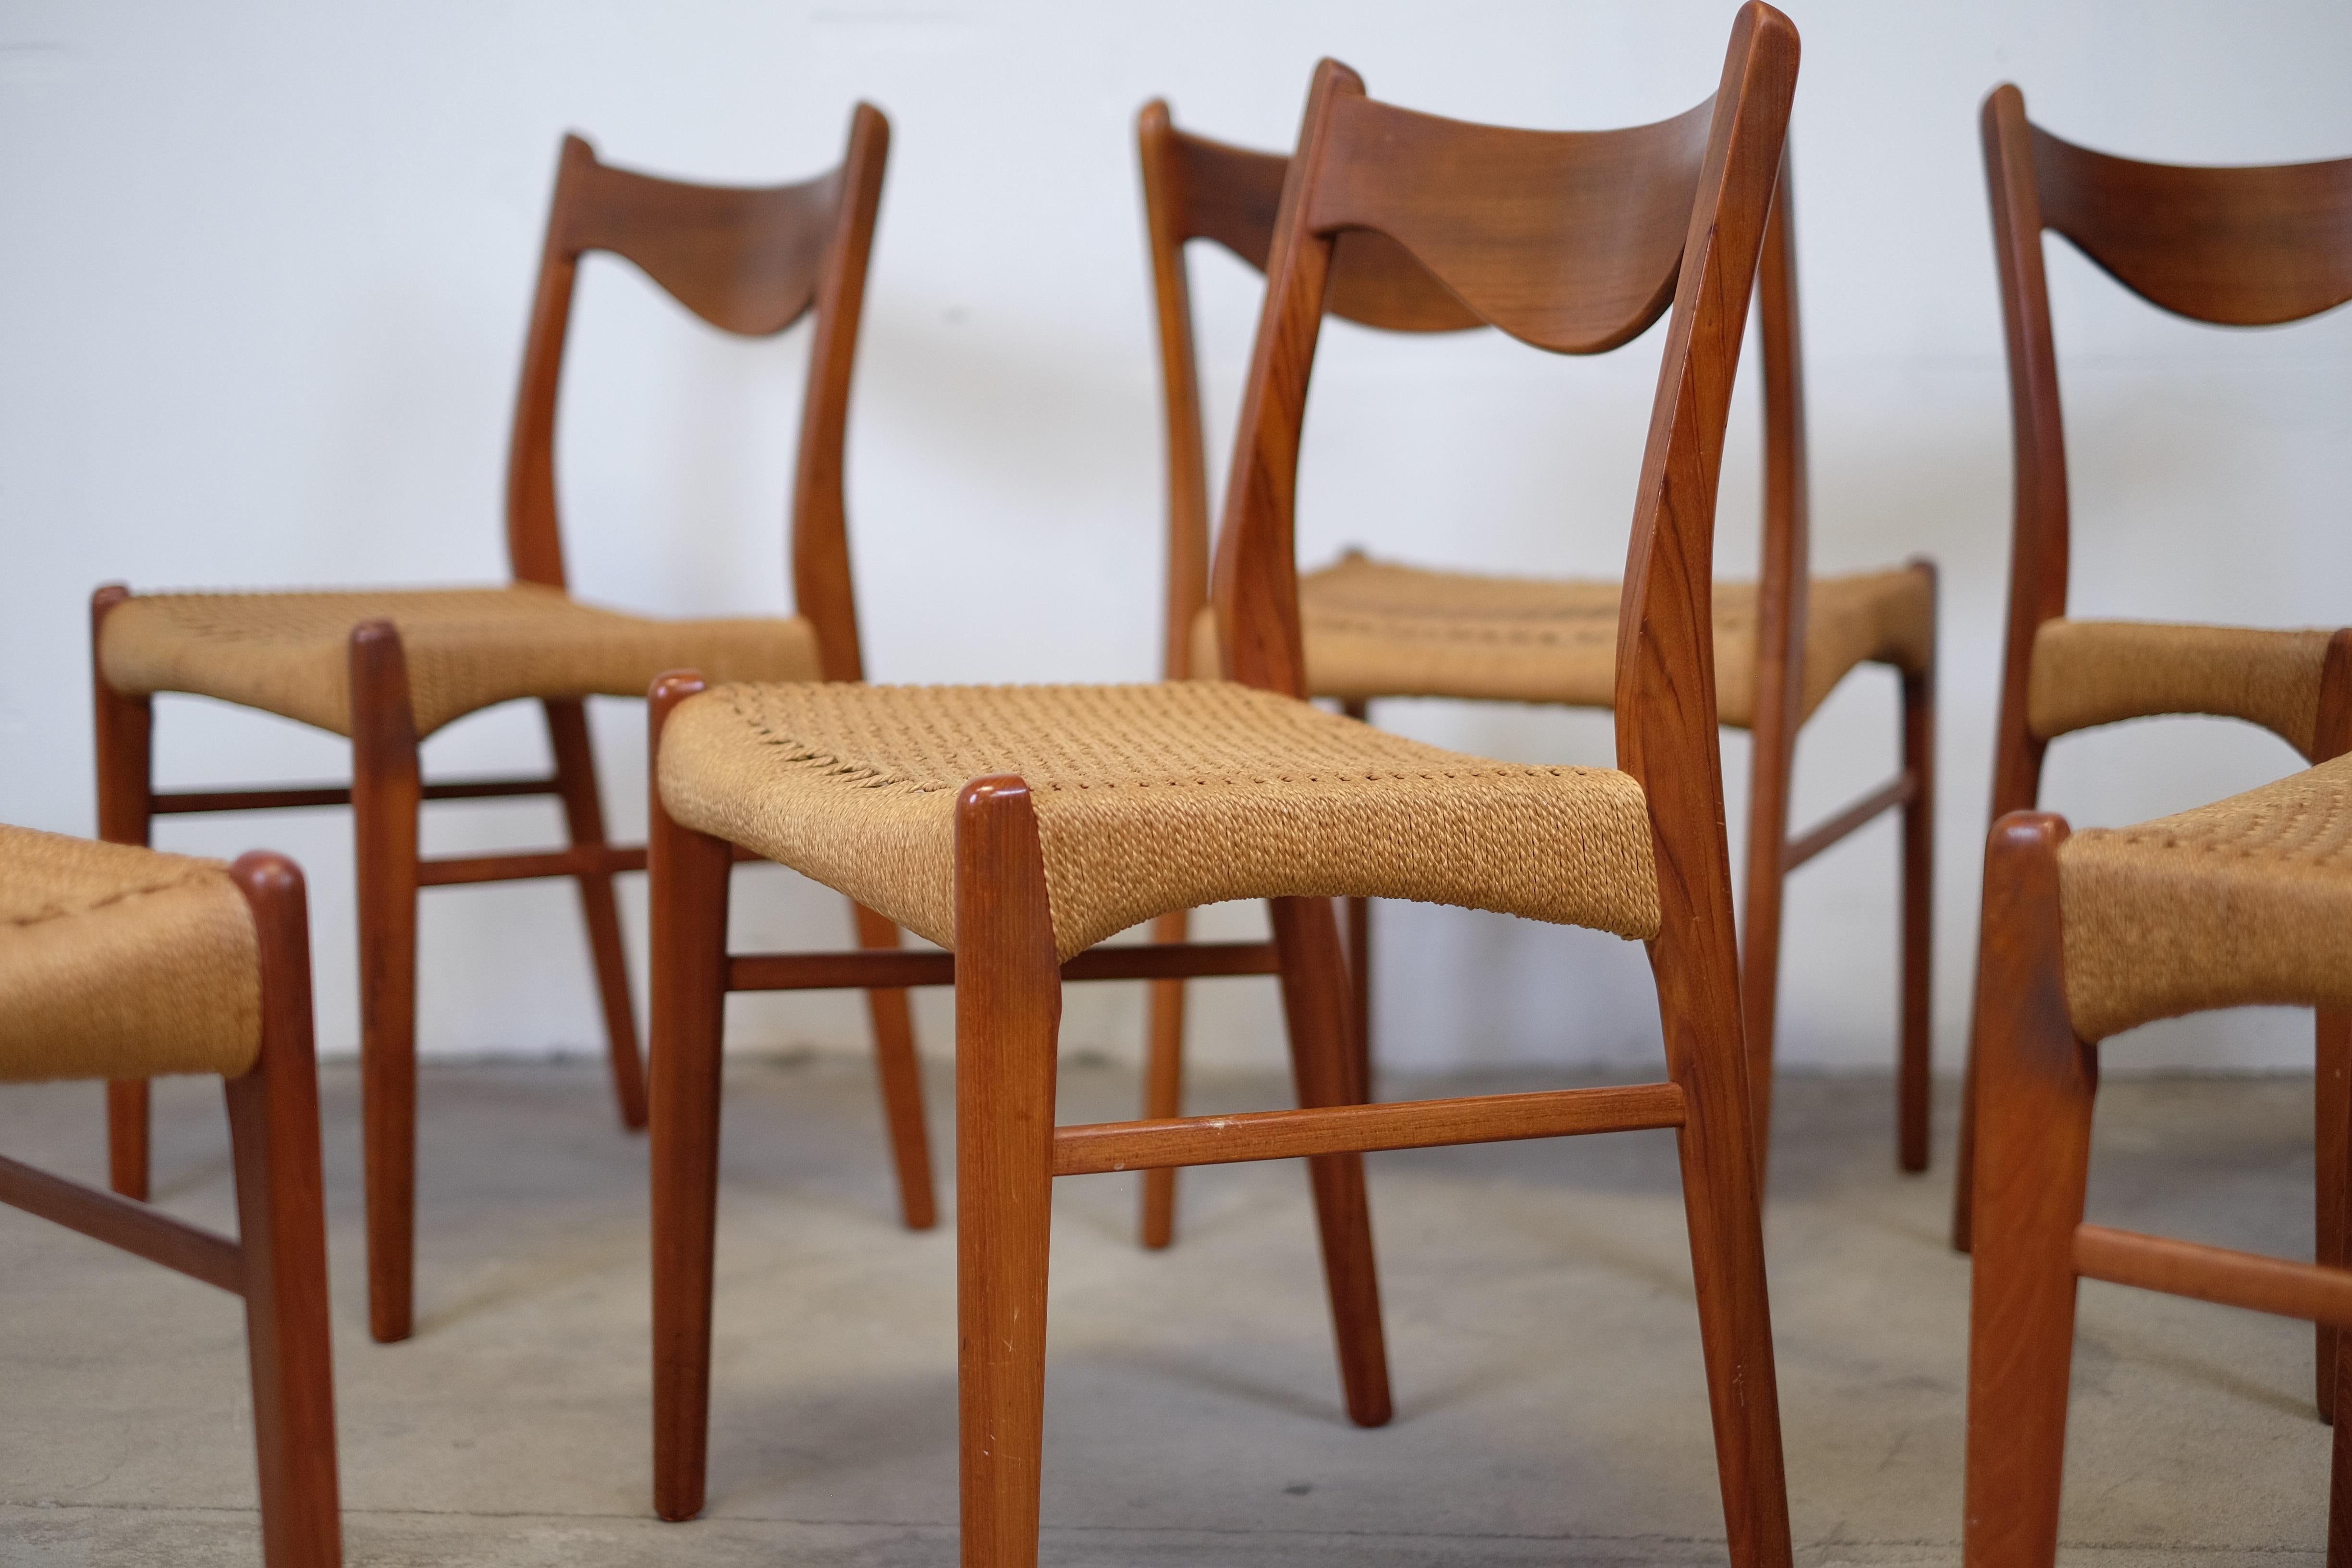 Set of Six Dining Chairs by Arne Wahl Iversen for Glyngøre Stolefabrik, Danish In Good Condition For Sale In Middelfart, Fyn